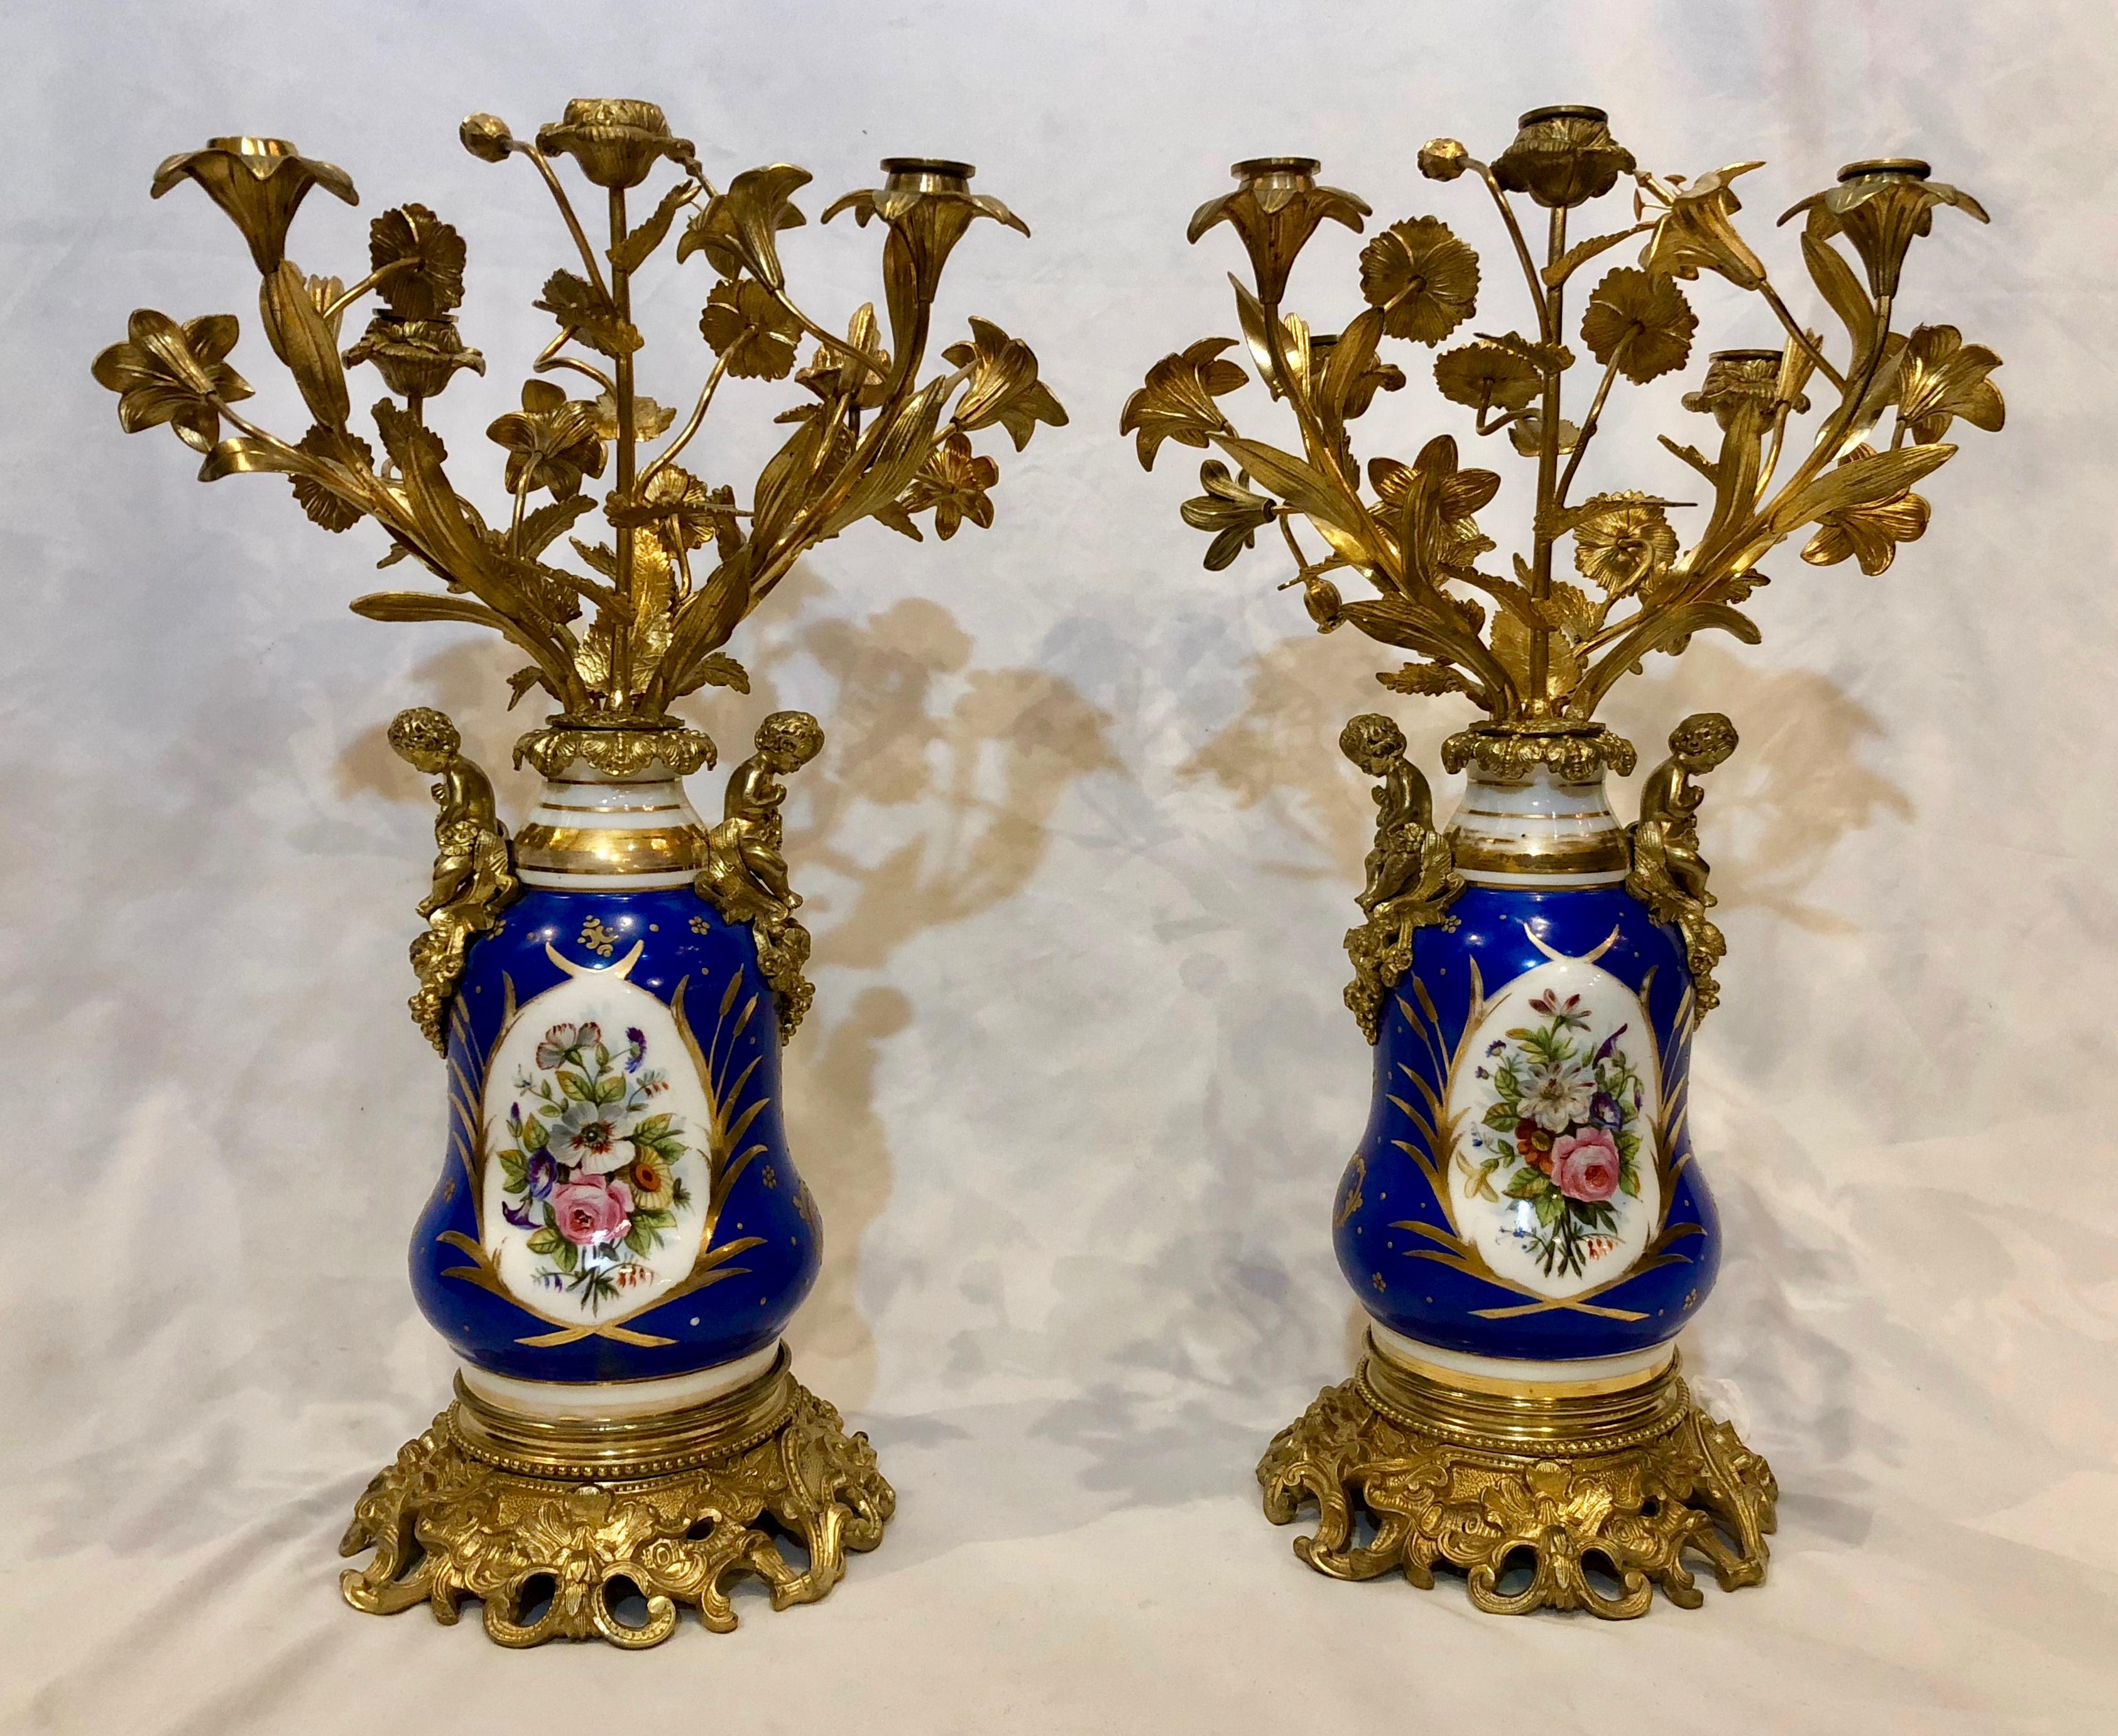 These Old Paris candelabra with their floral arms are very attractive. The porcelain has retained it fine color.  